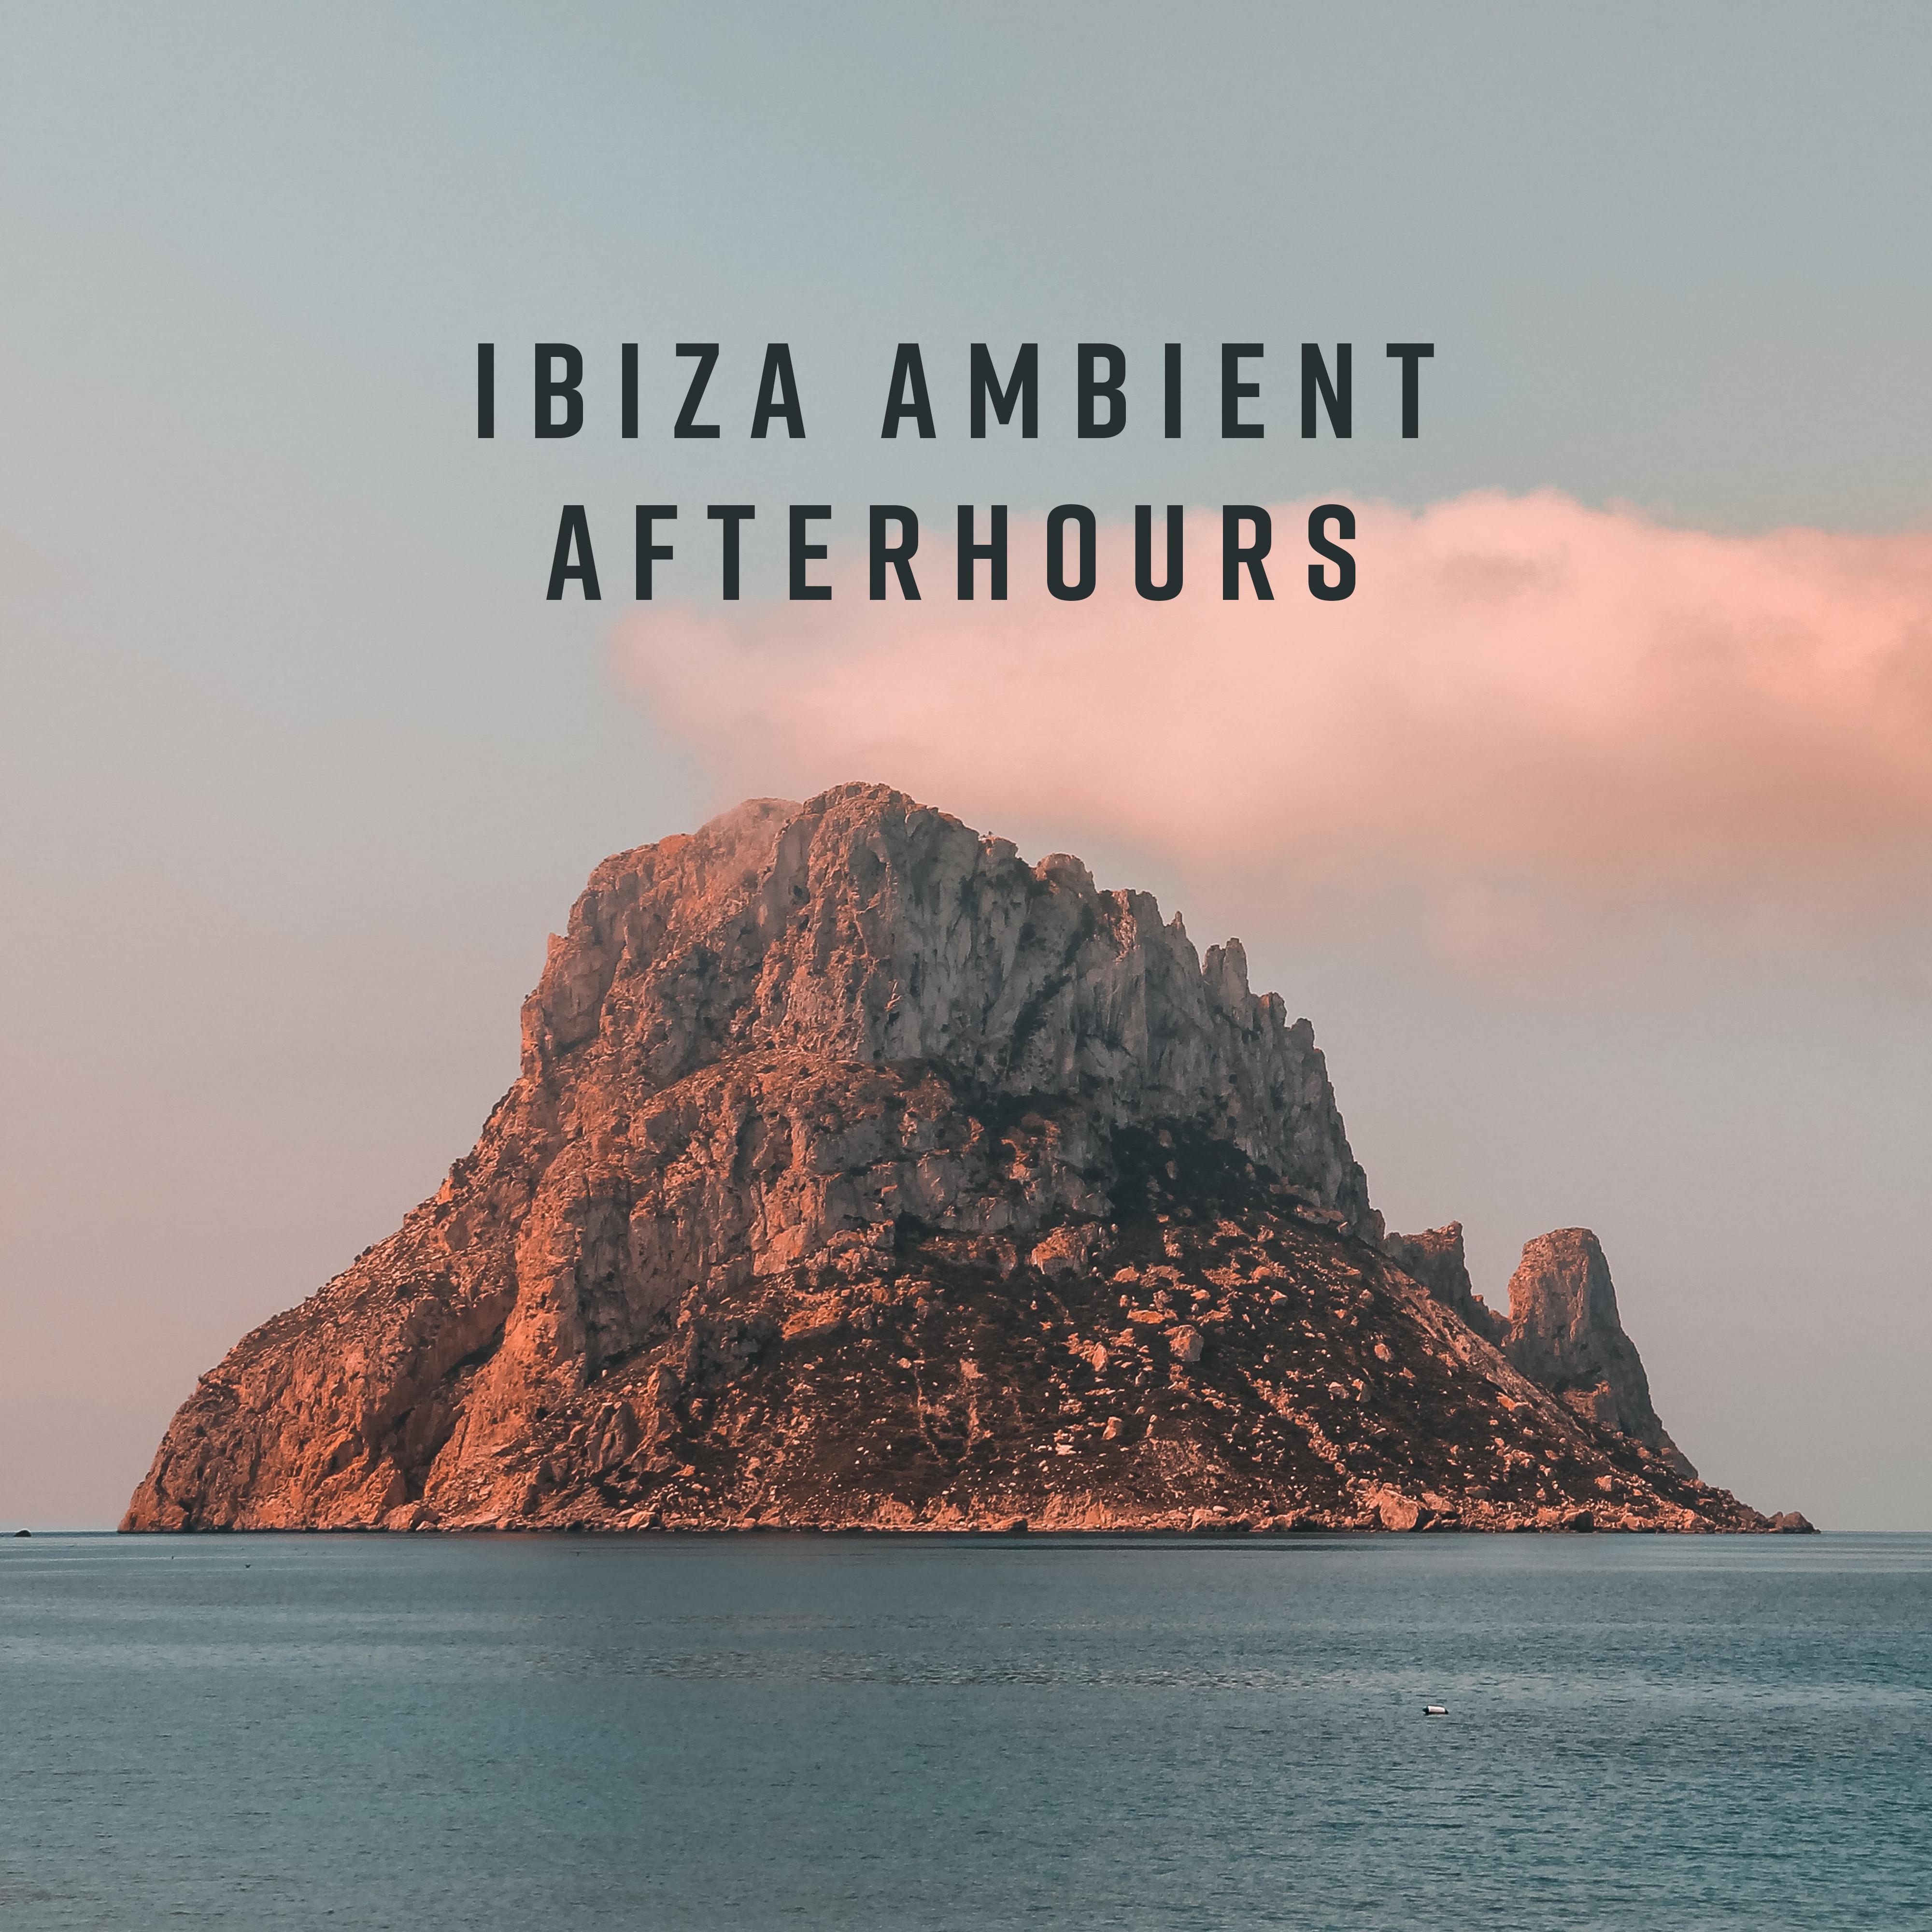 Ibiza Ambient Afterhours: Summertime 2019, Smooth Ibiza Chillout, Ibiza Party Melodies, Beach Music, Zen, Rest & Relax